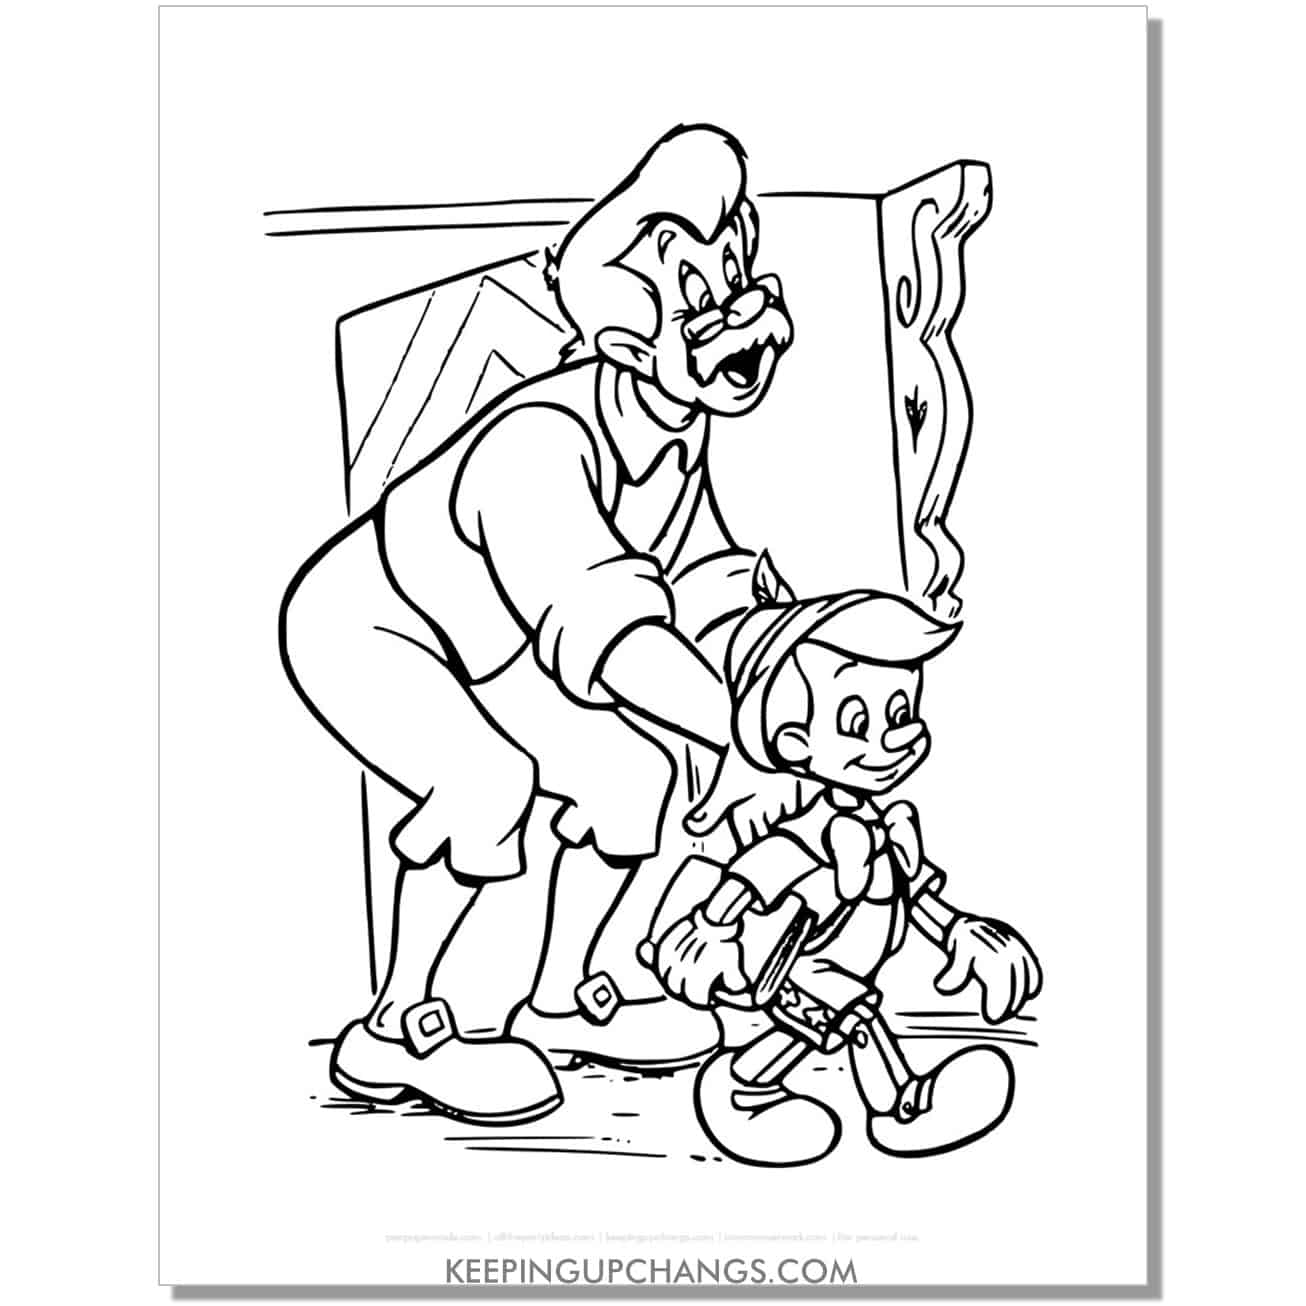 pinocchio with geppetto coloring page, sheet.